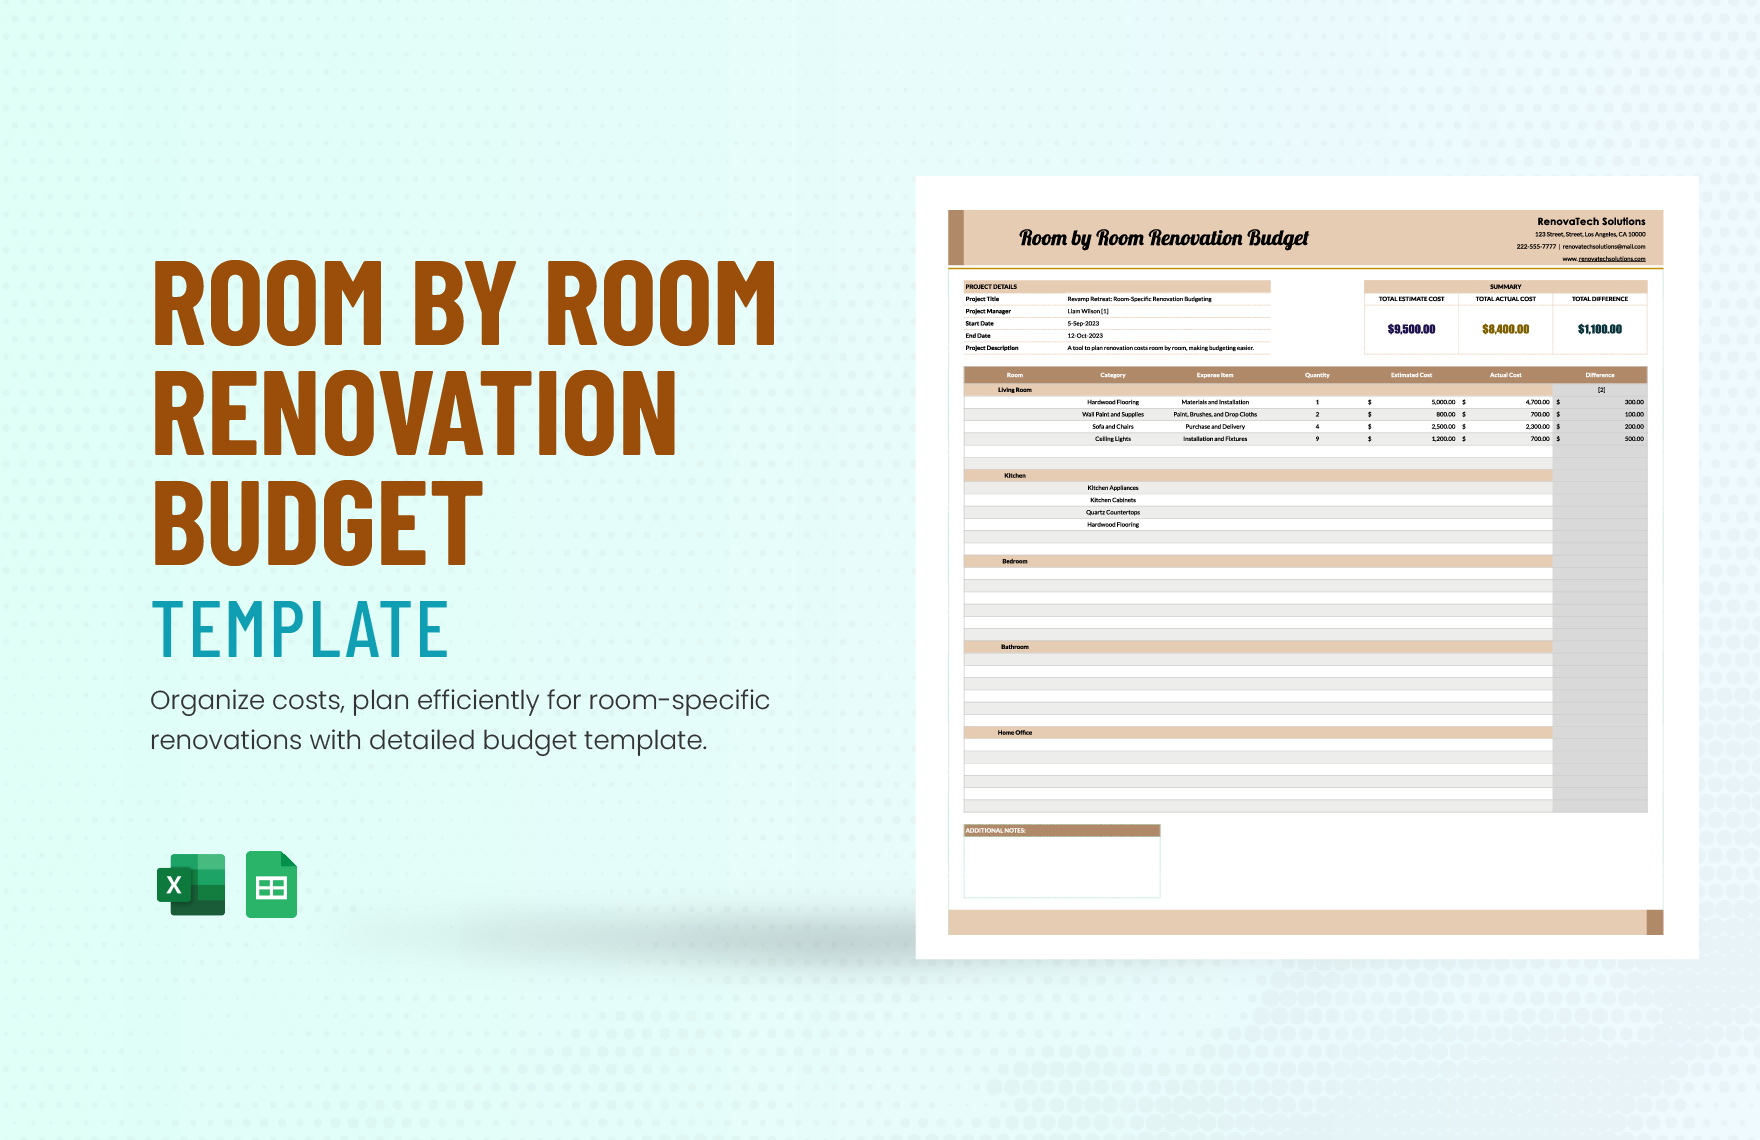 Room by Room Renovation Budget Template